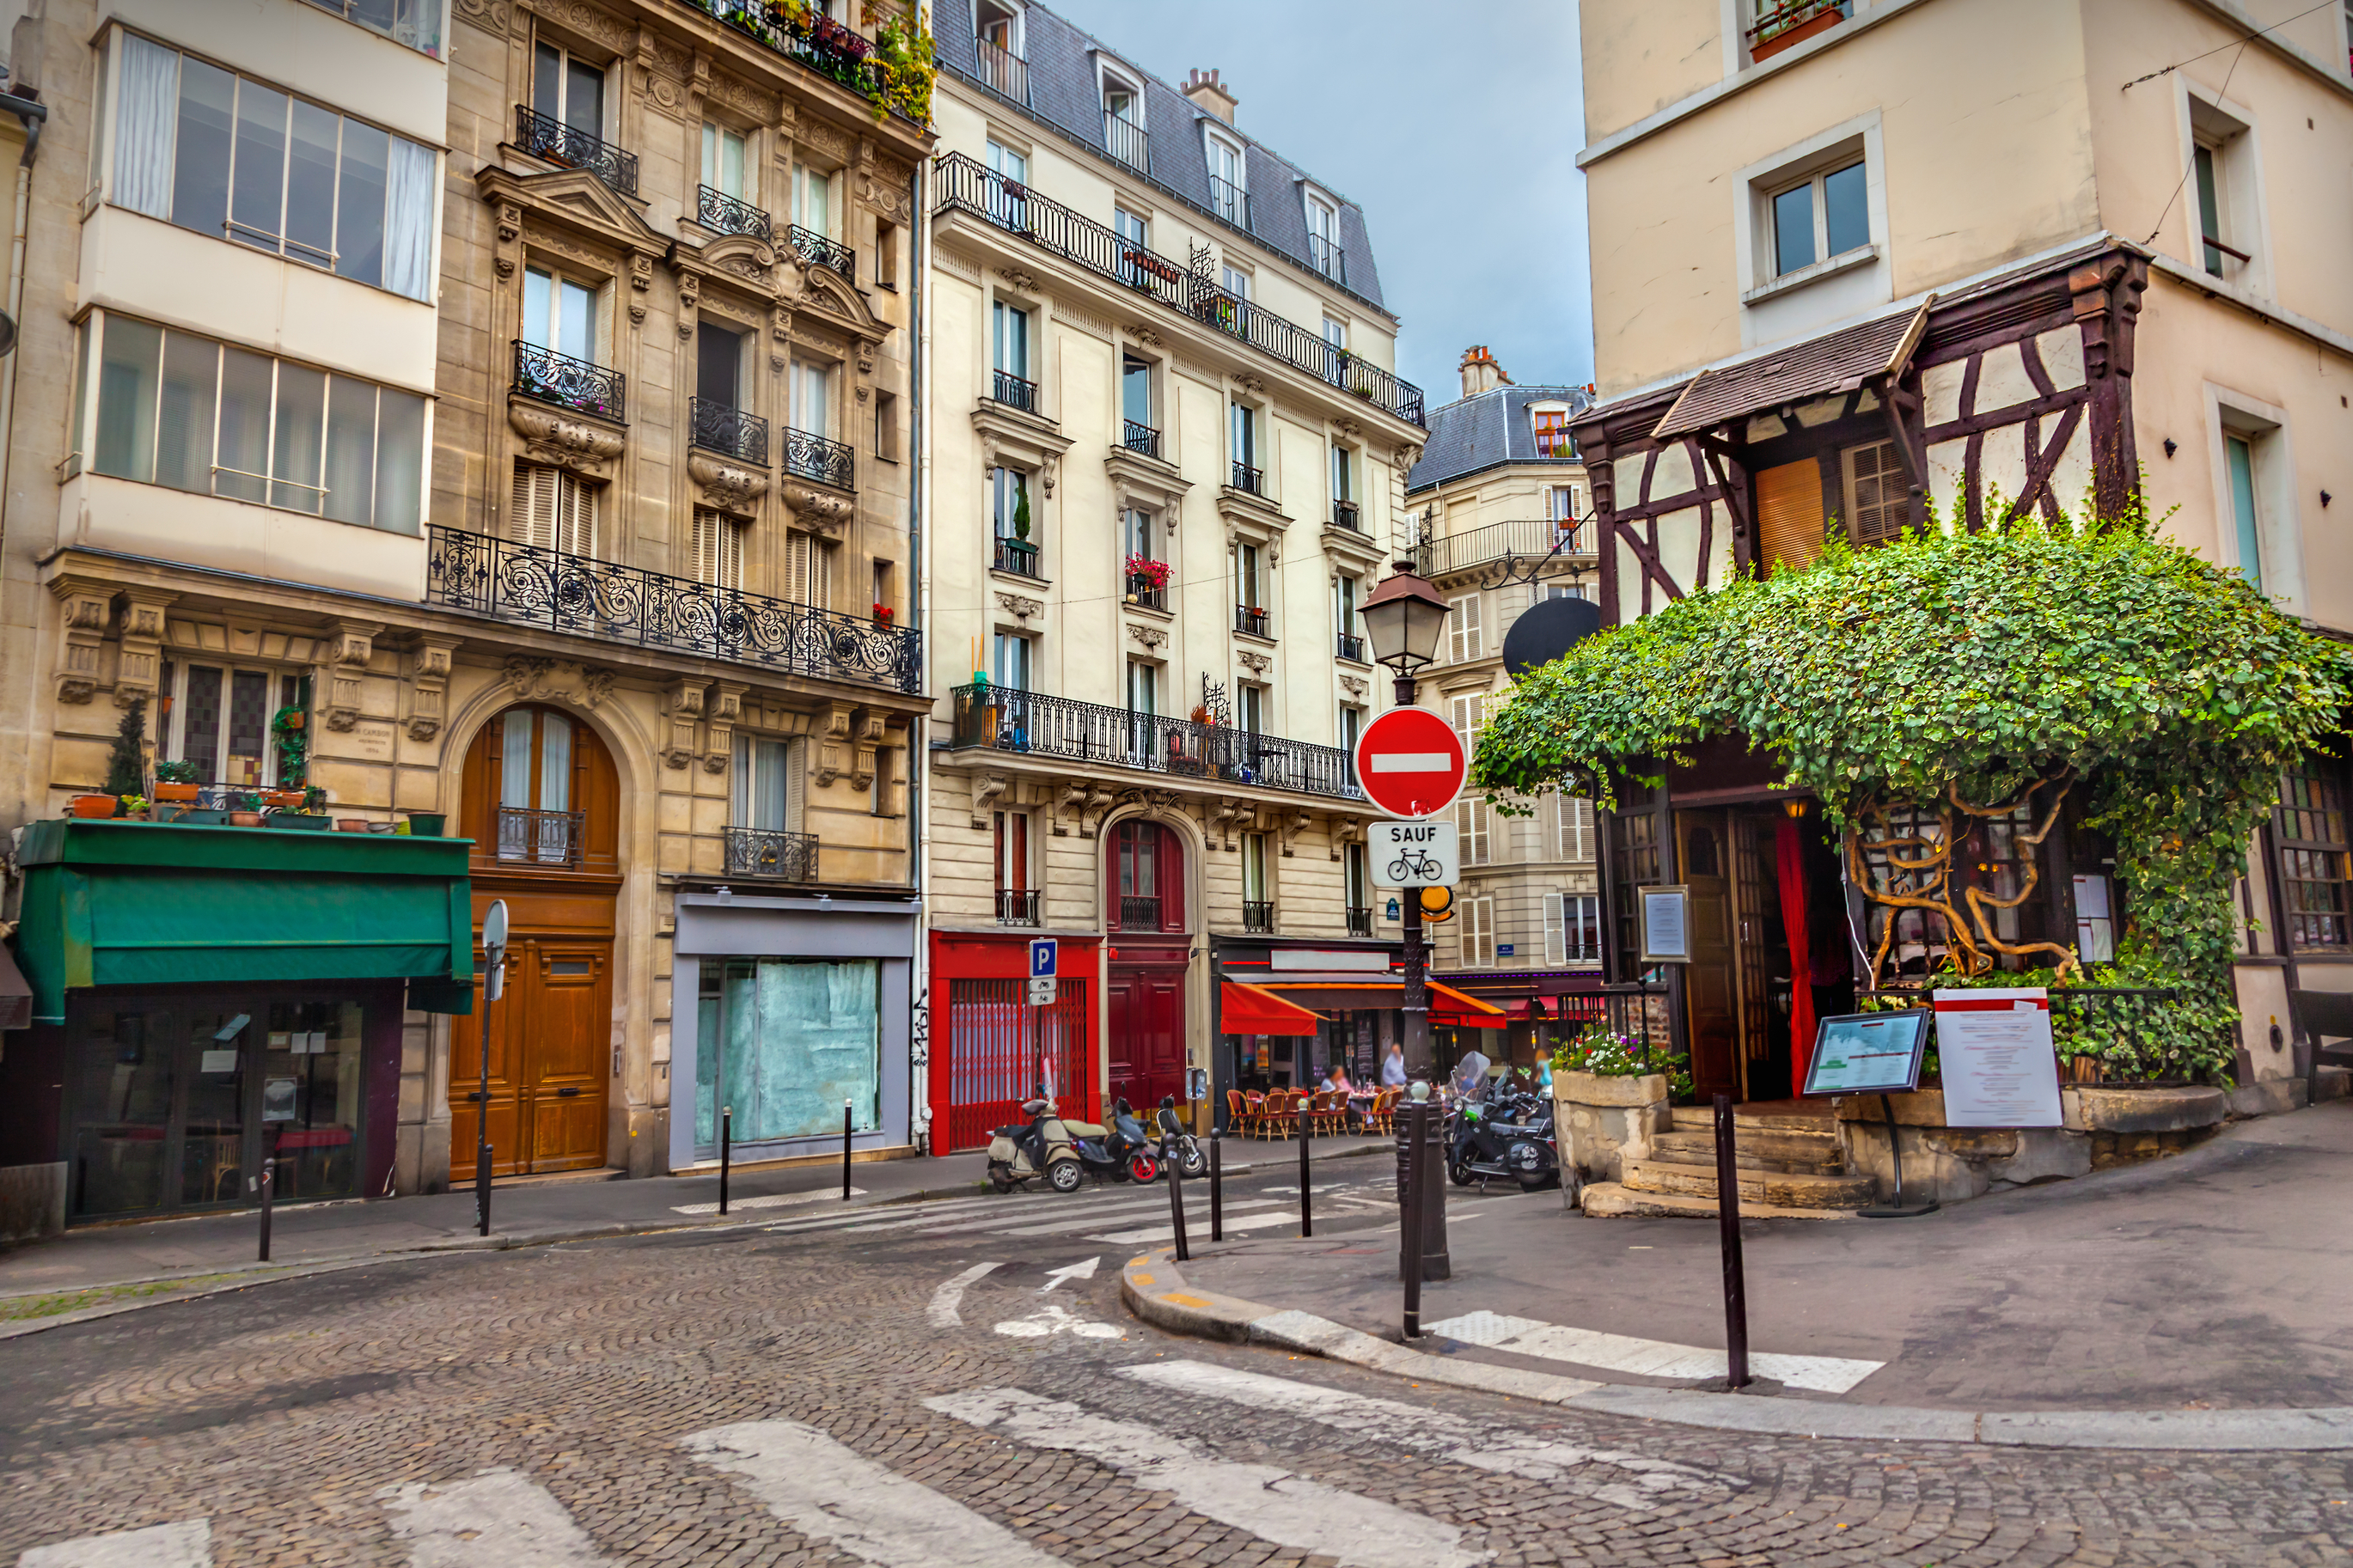 Image of cobblestone street and charming buildings in Montmartre, Paris